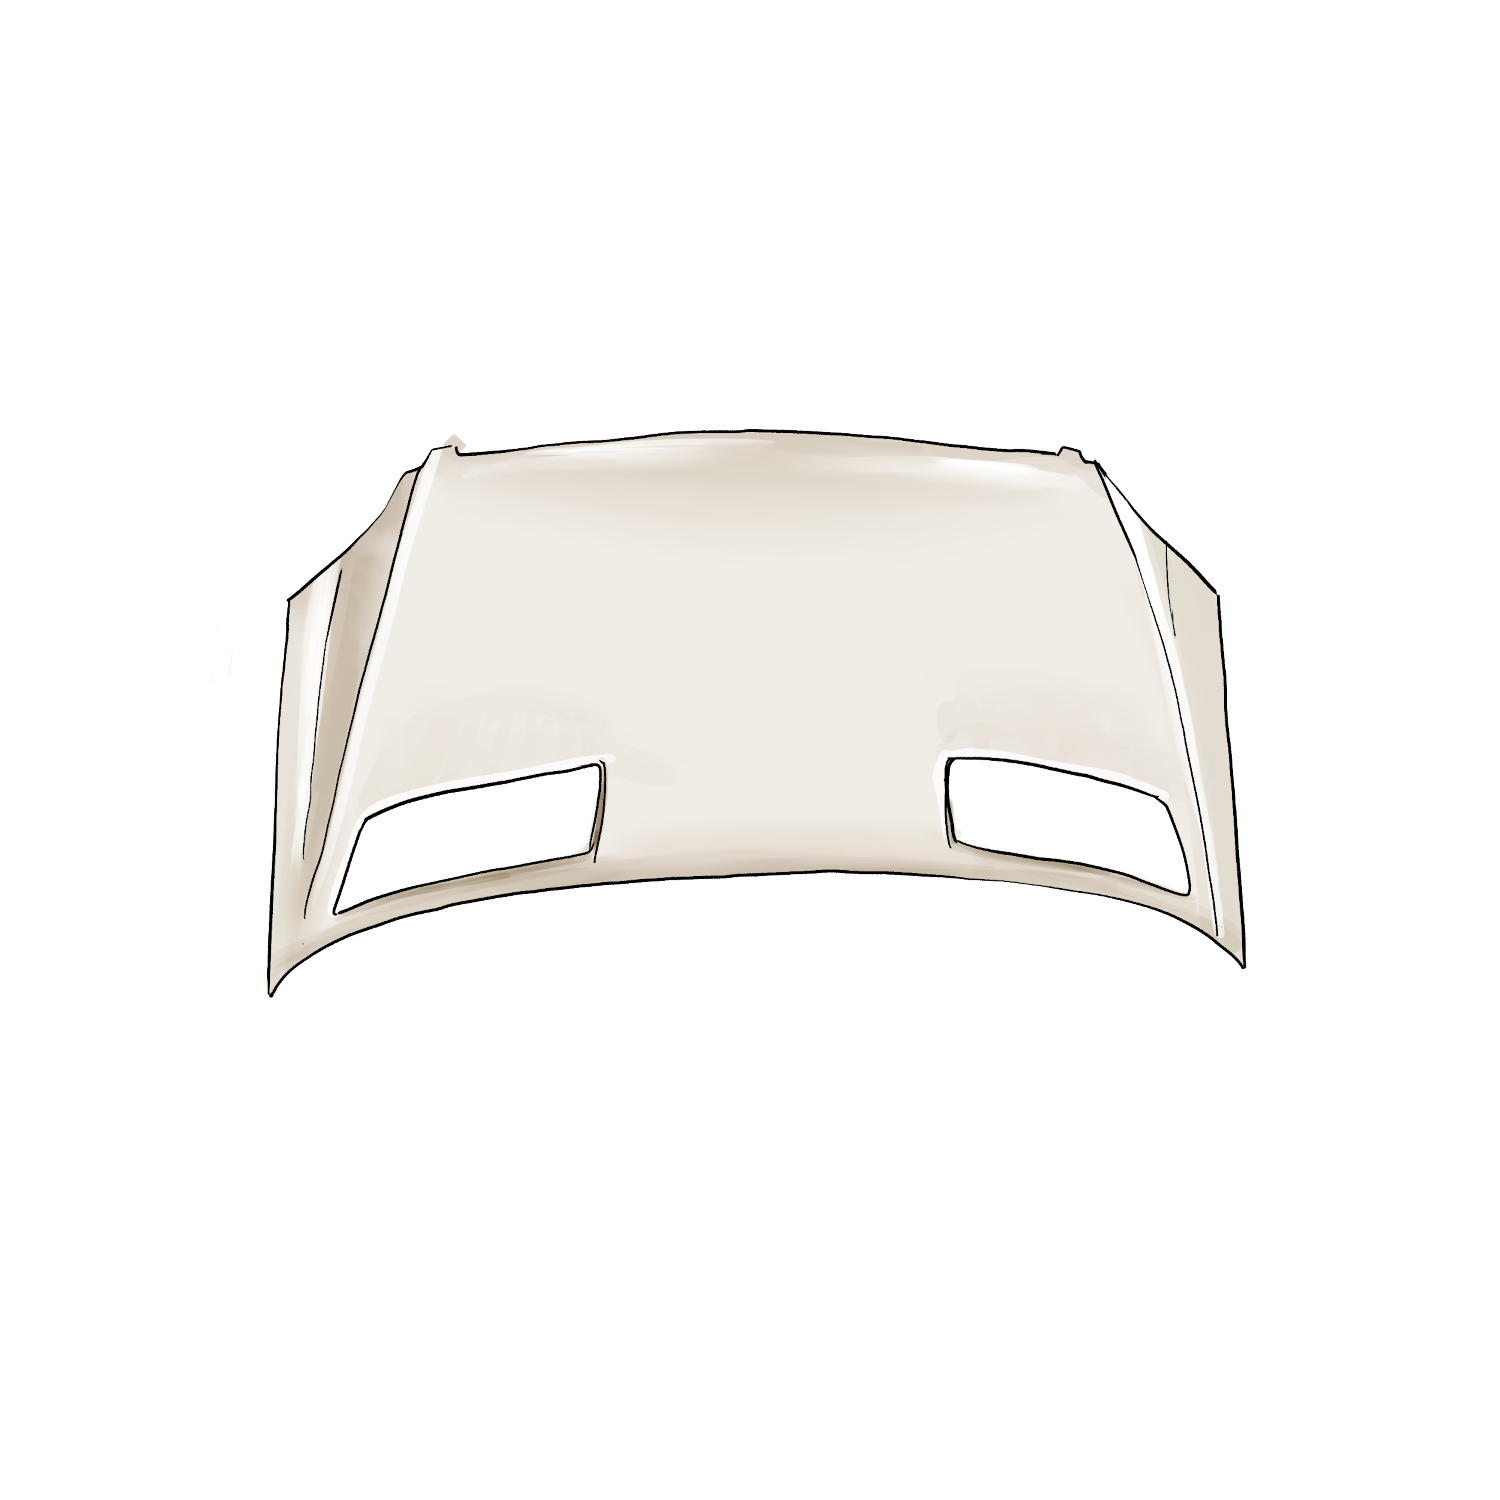  Product image 1 of the product “Engine hood OX5 ”